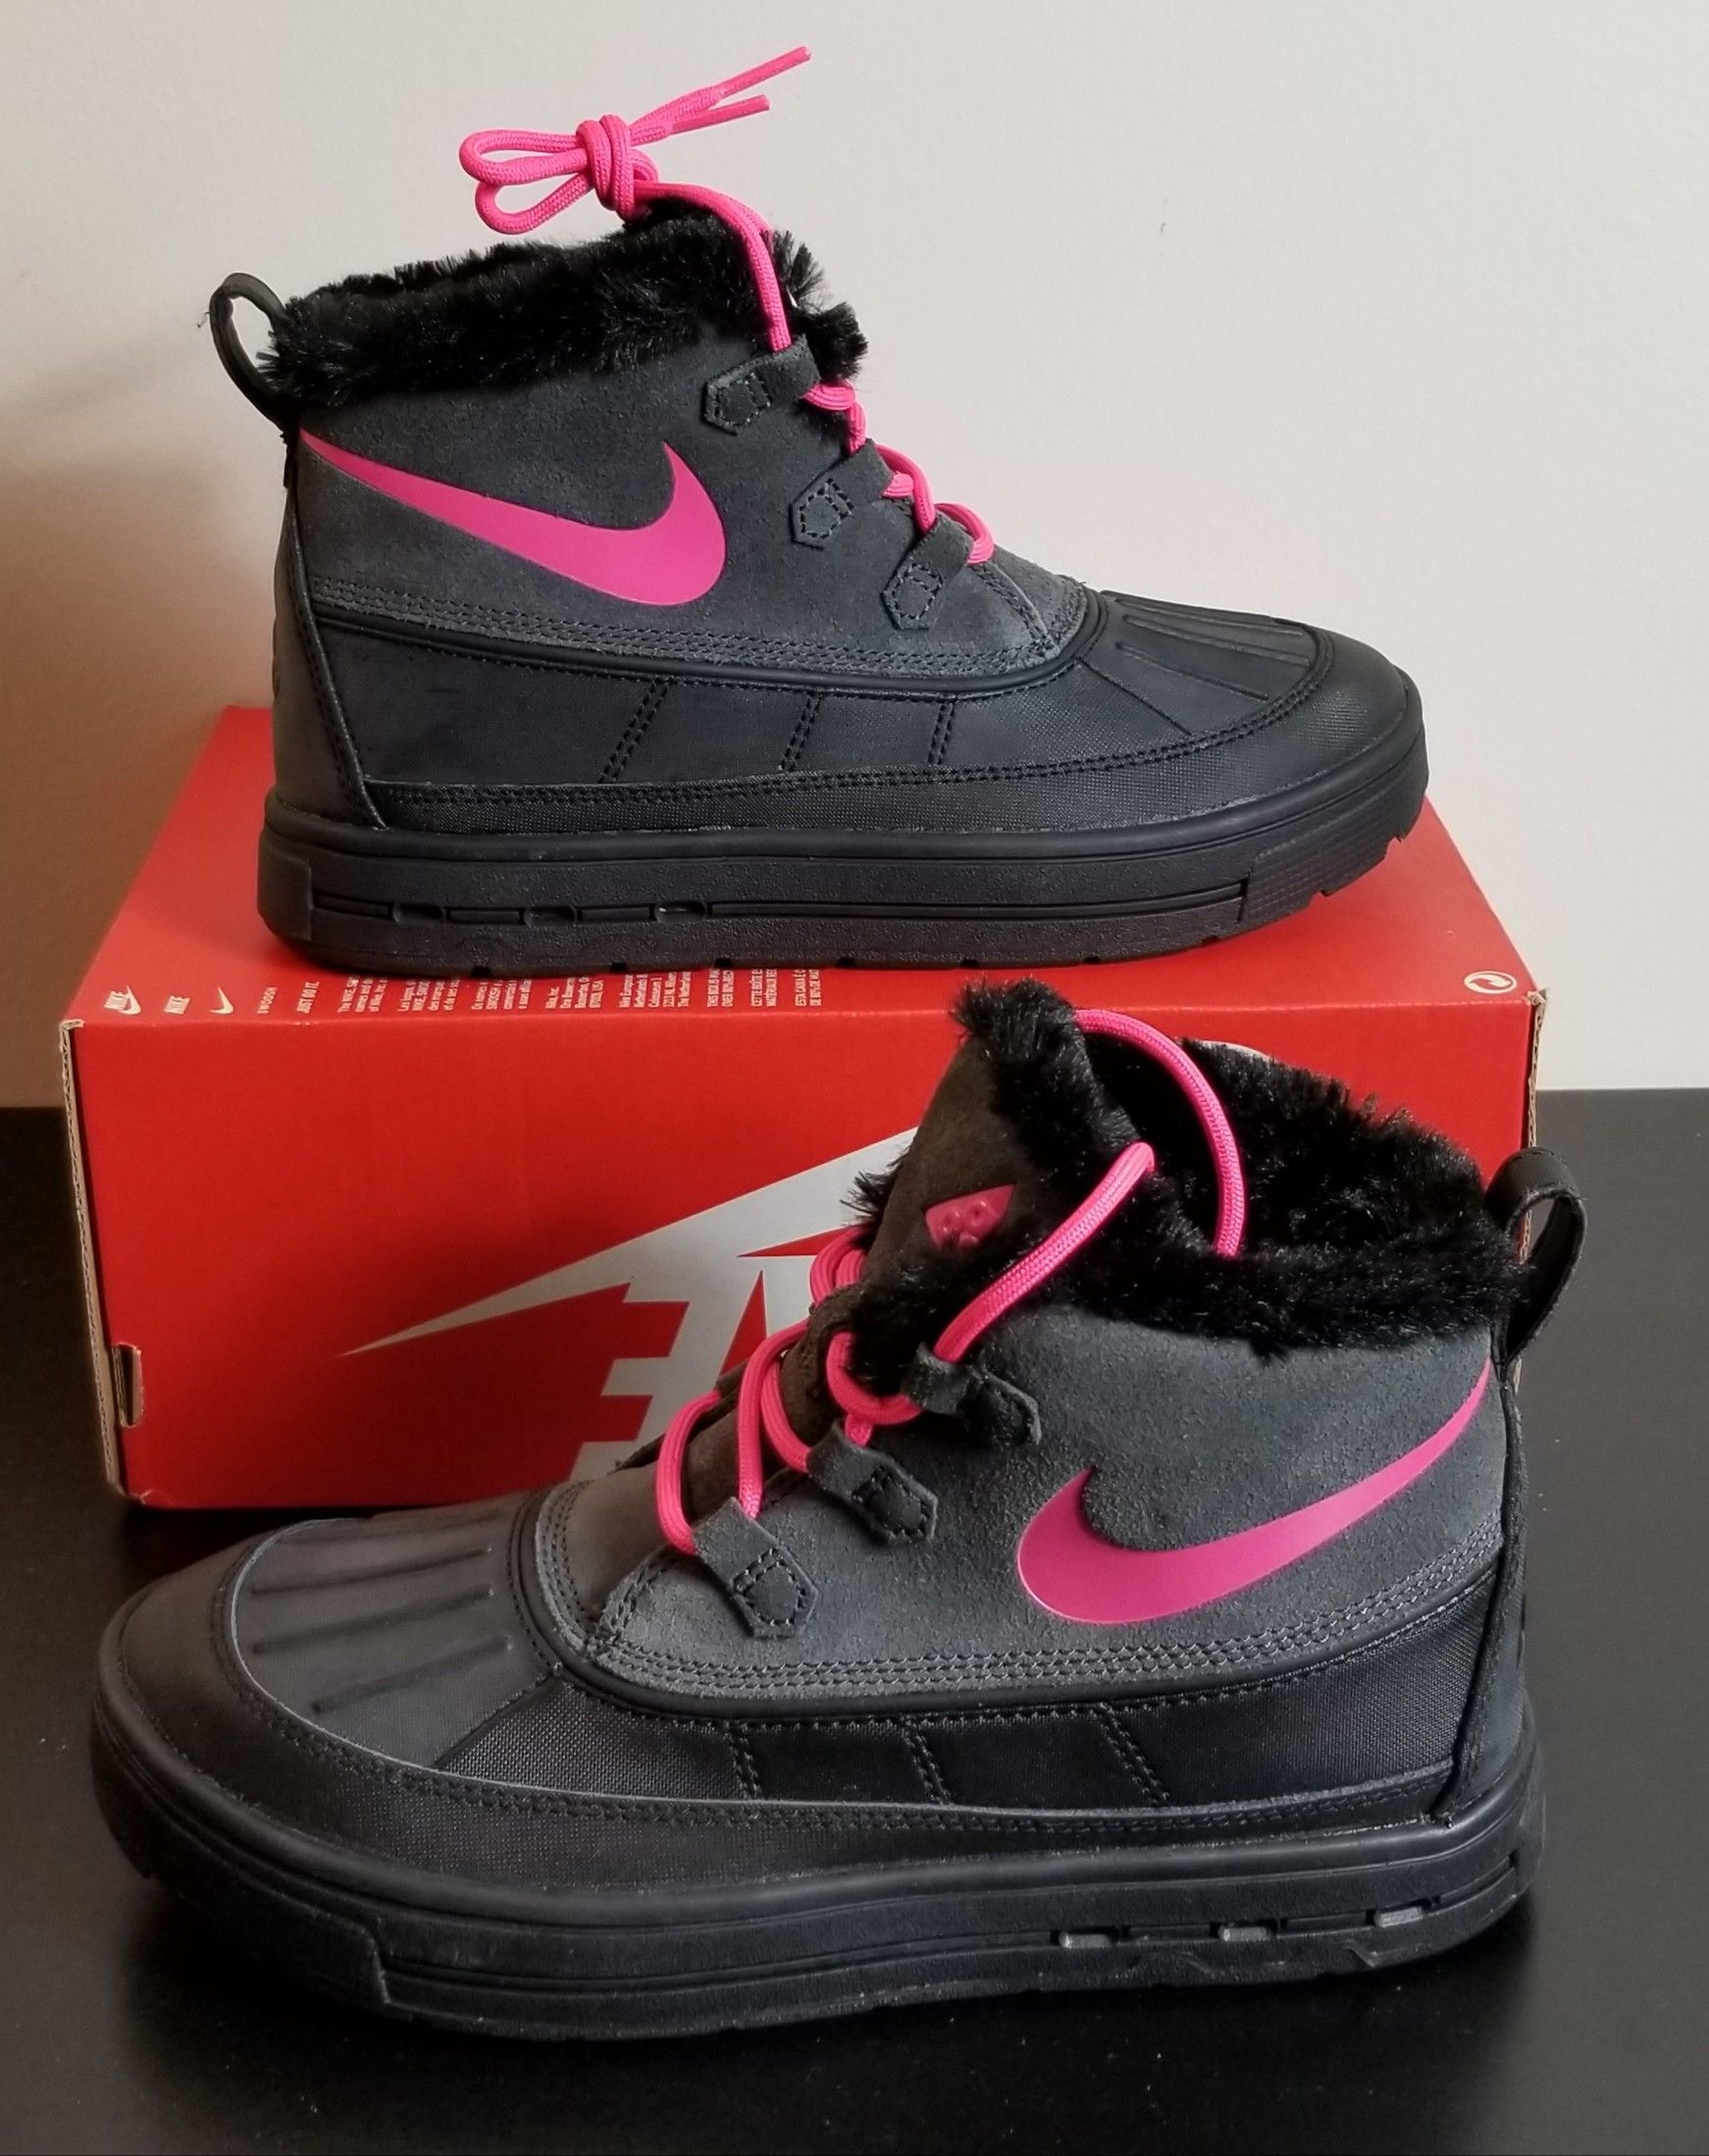 NIKE WINTER BOOTS size 5Y/6.5W